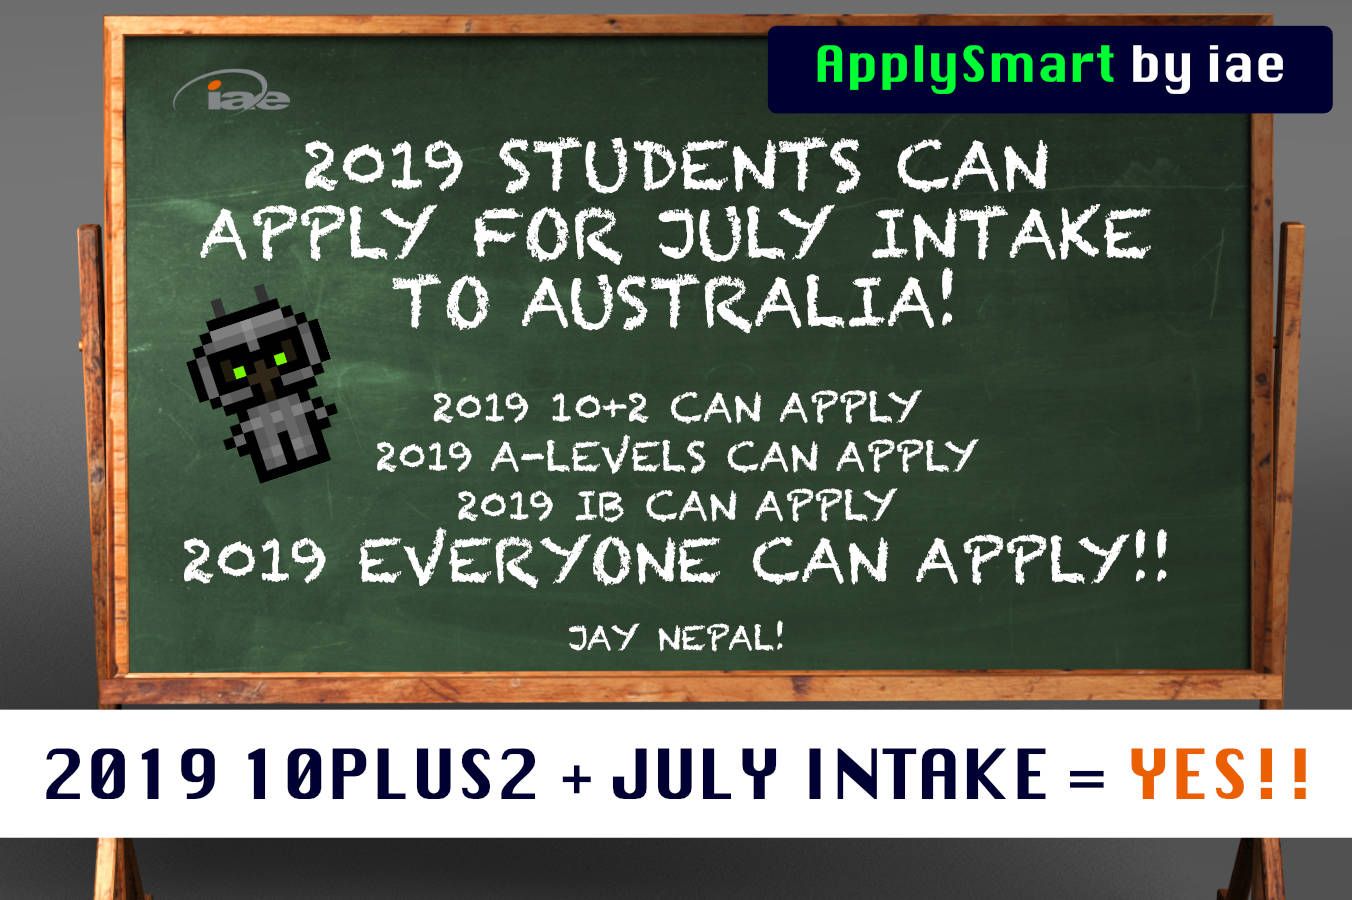 😎 Can 10+2 graduates from 2019 apply to study in Australia?